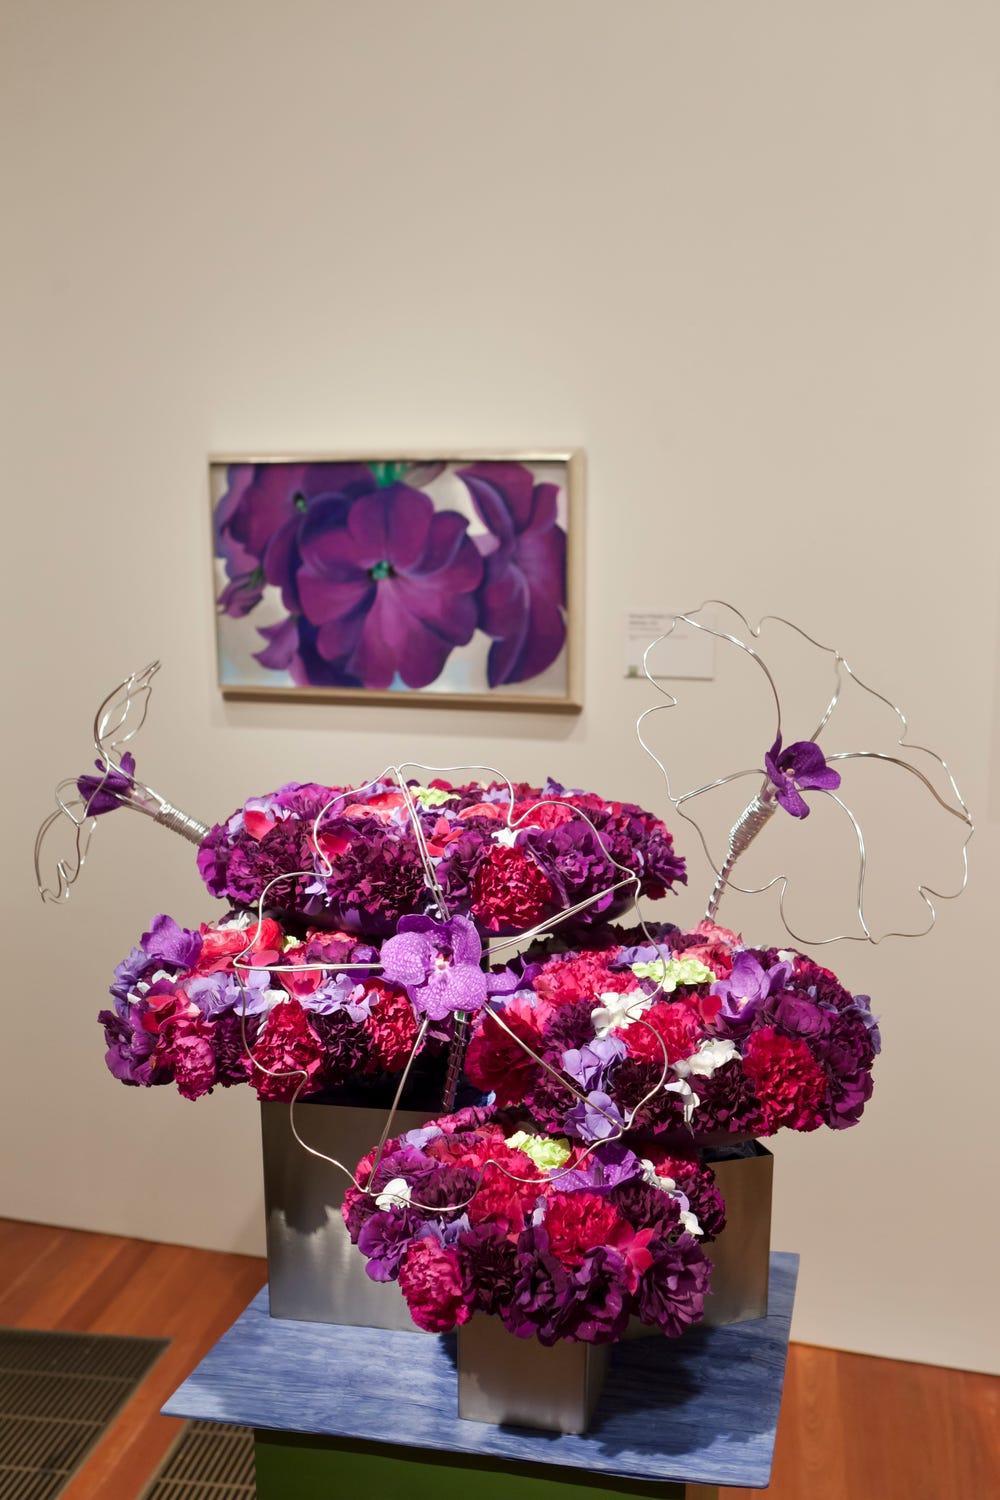 Photograph of purple, red, and pink flowers in style of painting of purple flowers in background.